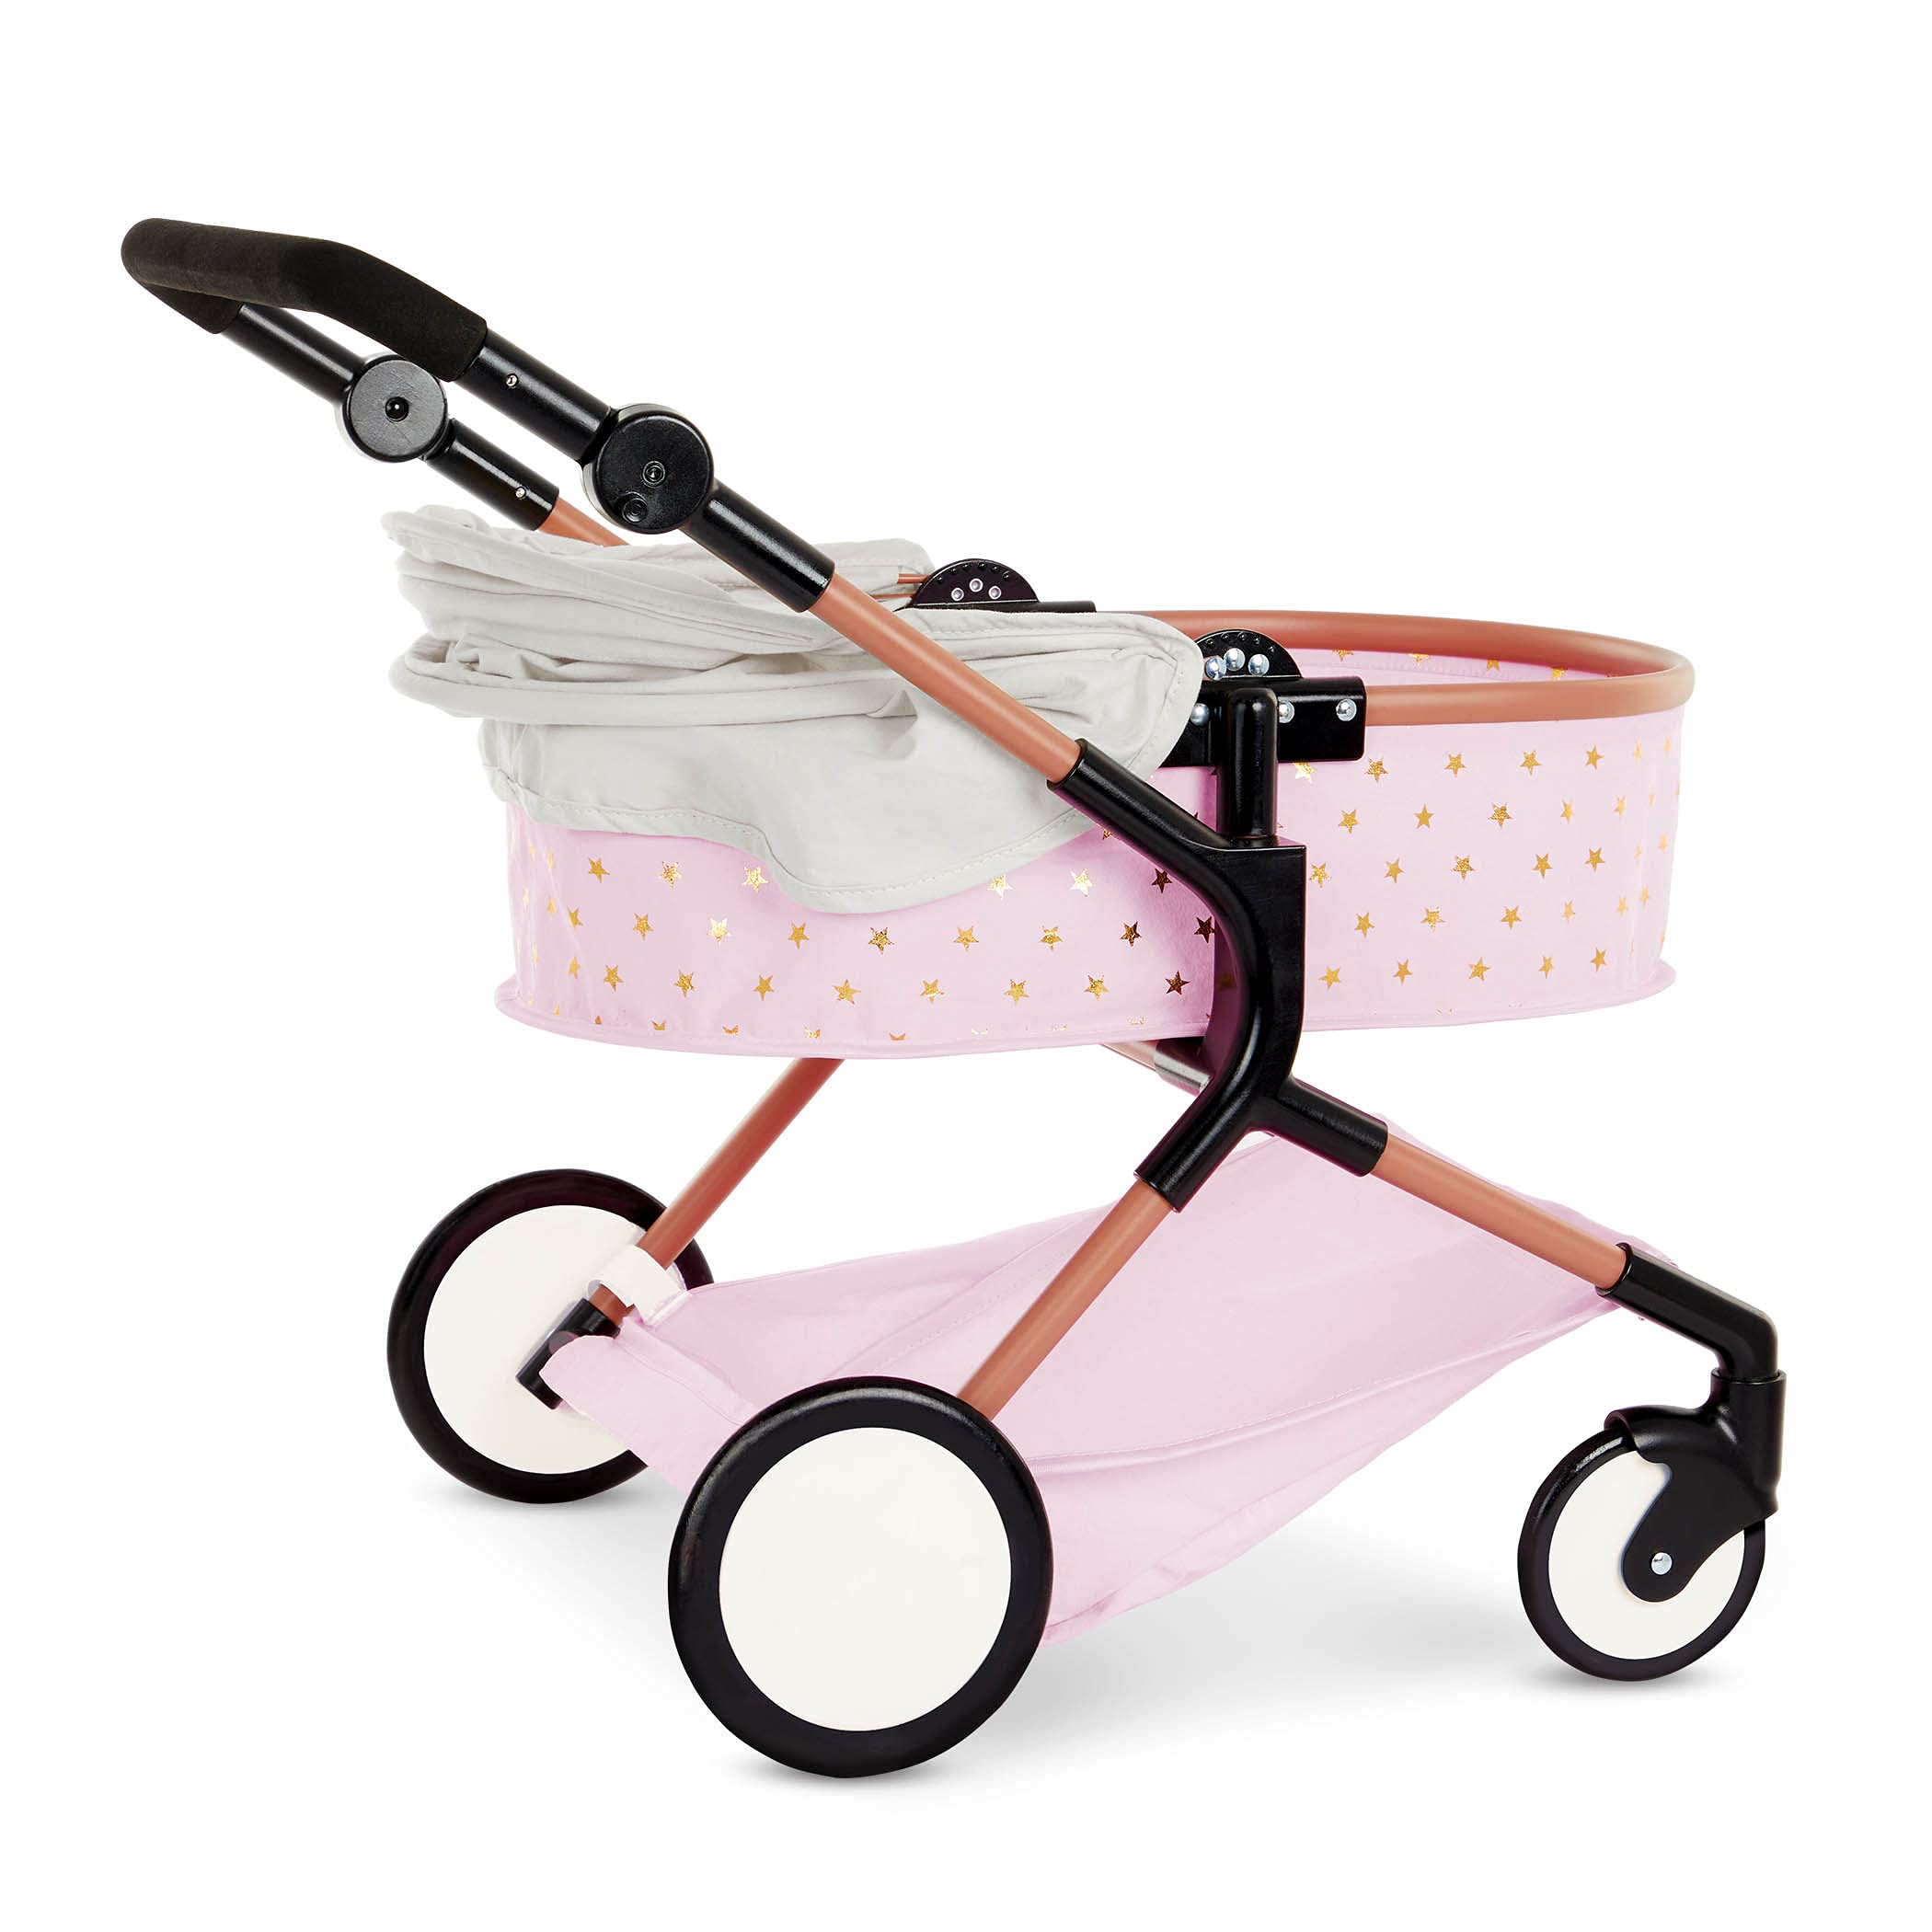 babi by Battat - Baby Doll Double Stroller Mini Gold Stars Foldable Canopy, Swivel Wheels, Basket Pink Carriage Fits Twin 14-inch Dolls Children’s Toys Kids Ages 2+ (BAB7630C1Z)